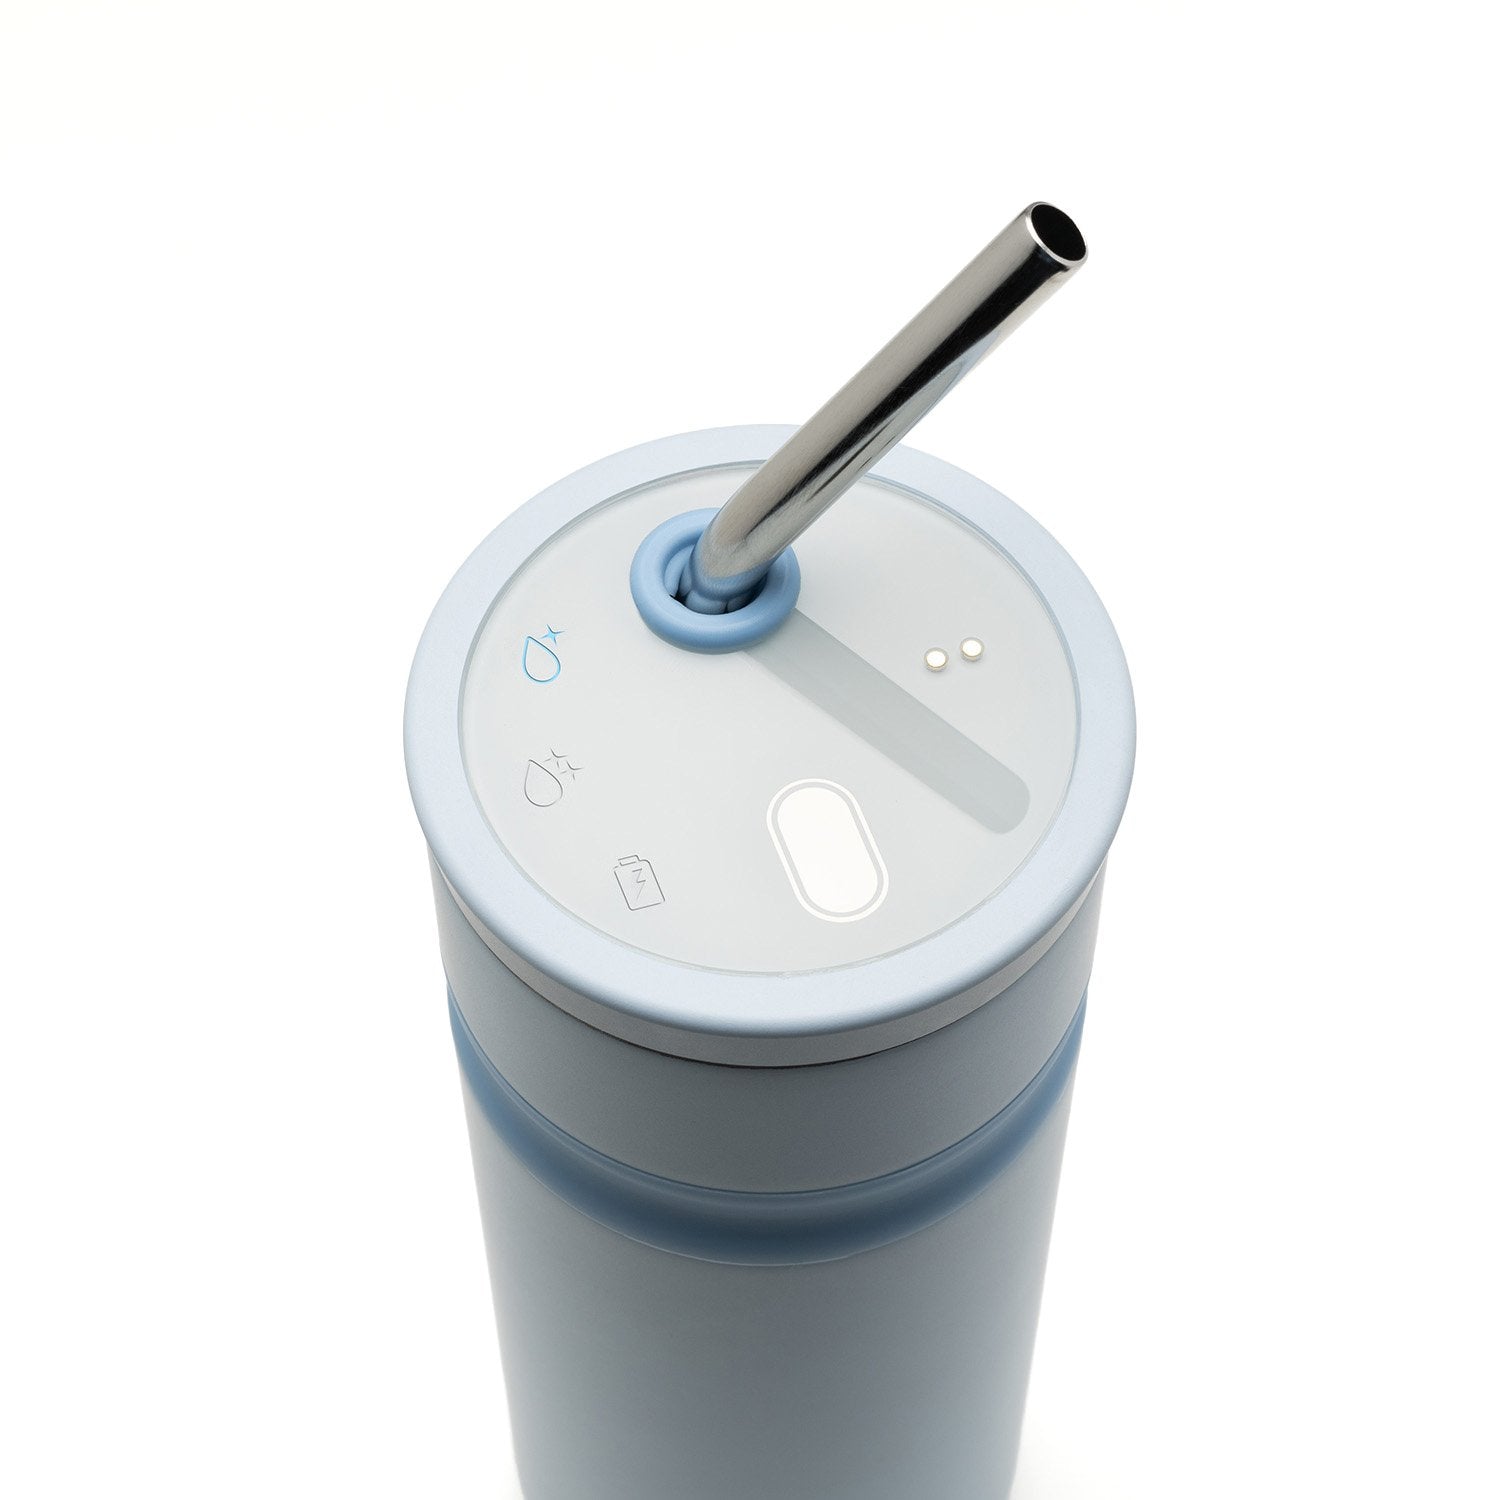 Top view of light blue metal bottle with metal straw